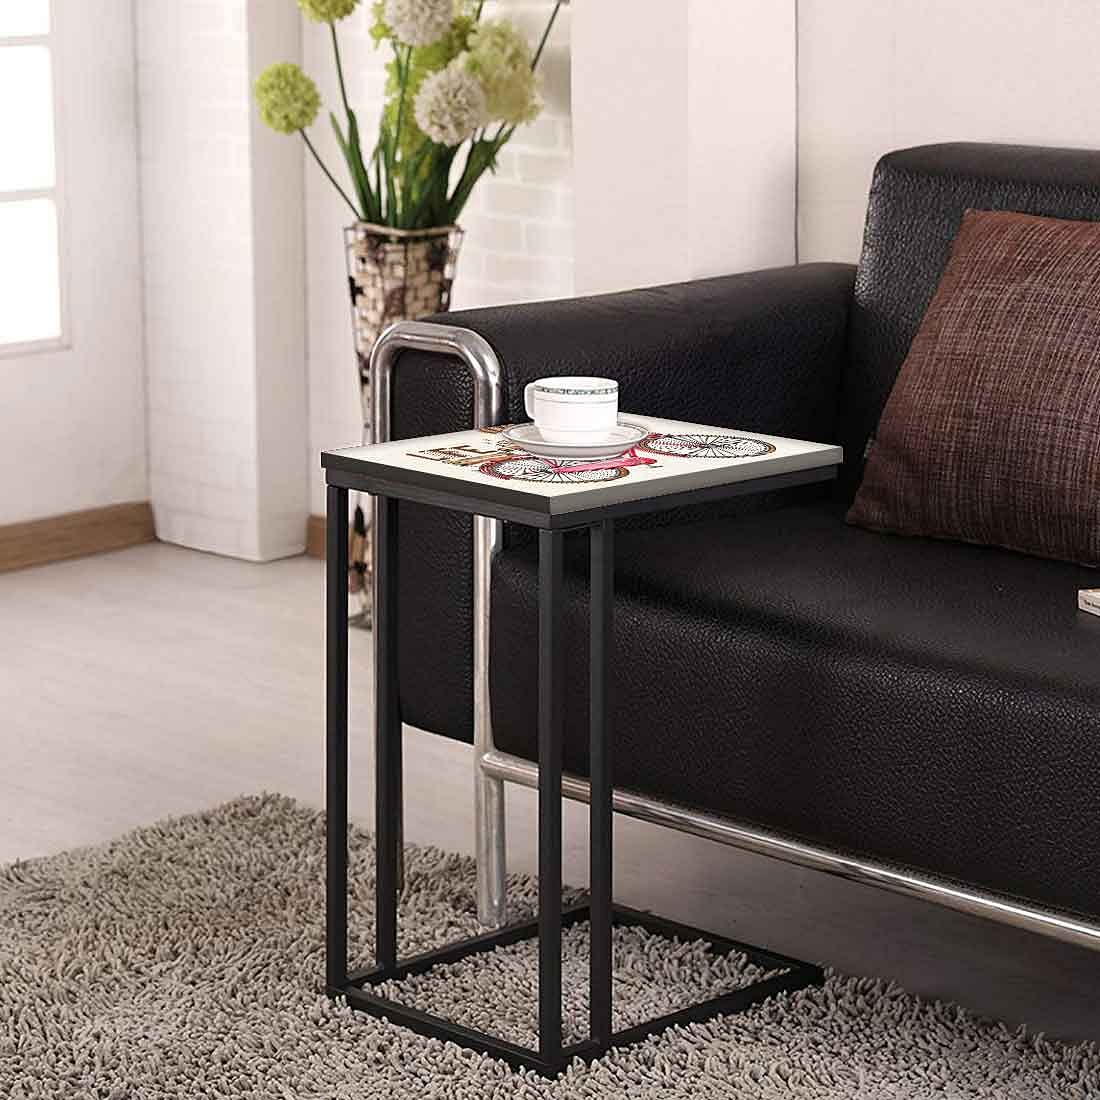 Modern C Side Table - Life is Beautiful Cycle Nutcase